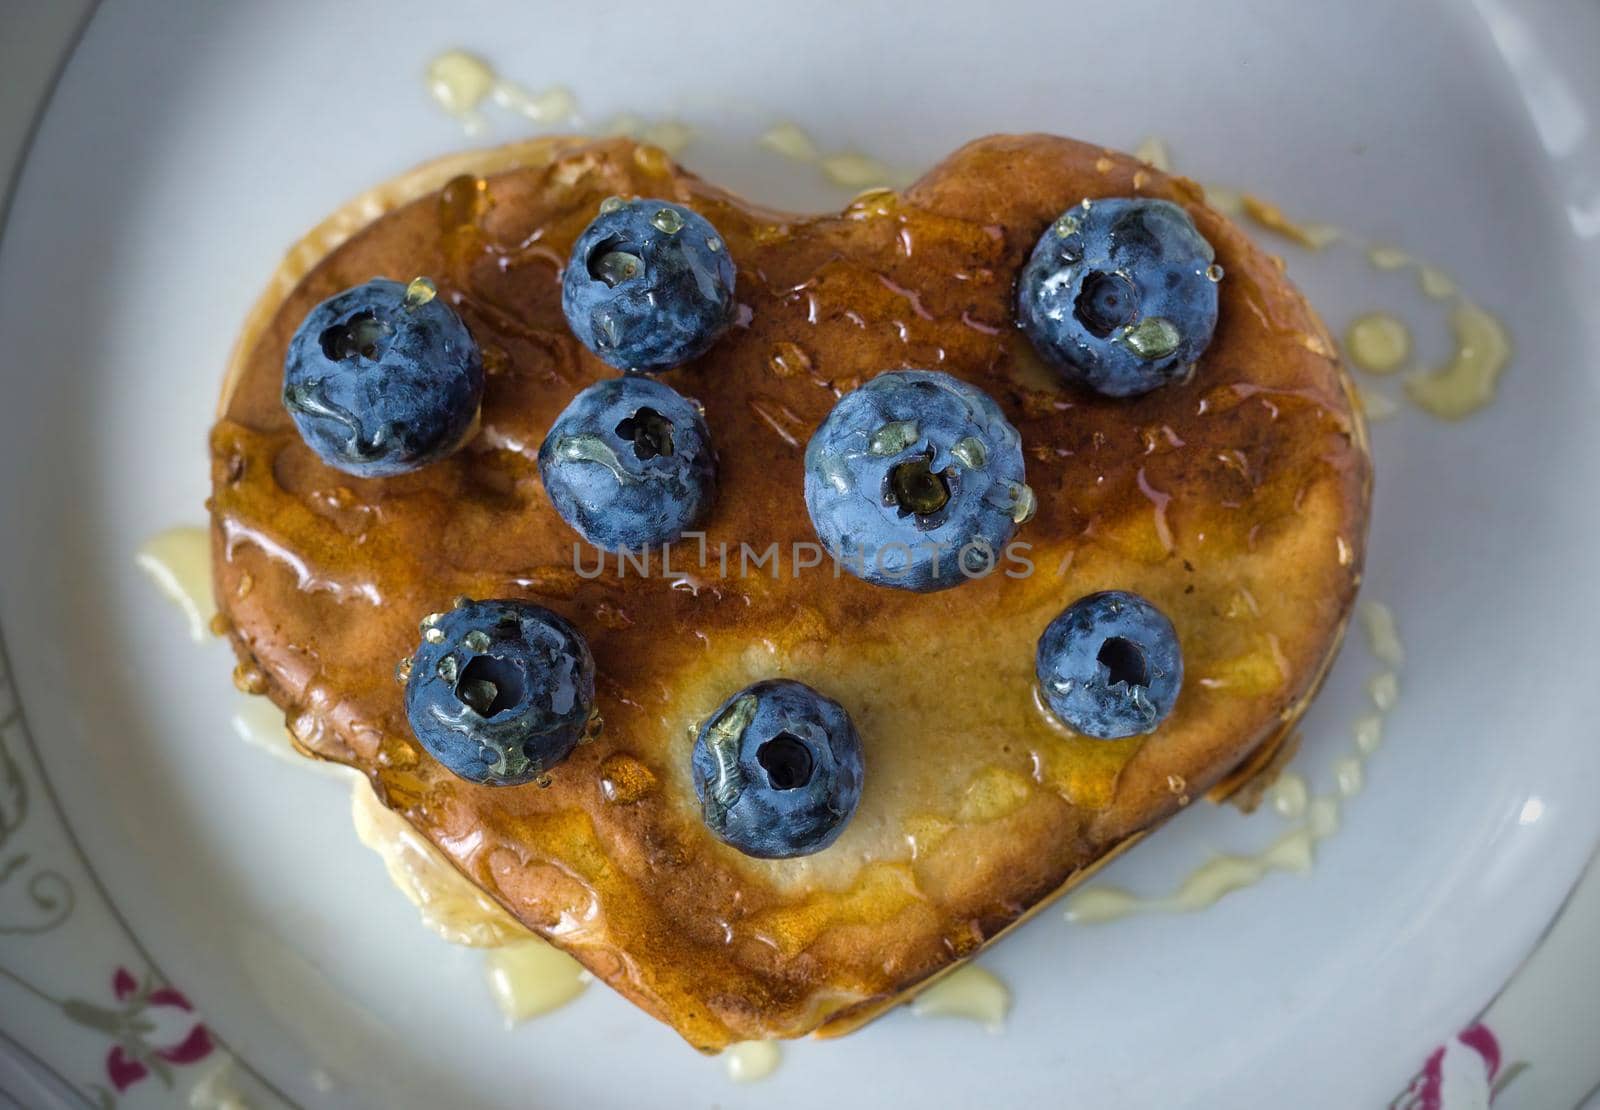 Healthy food concept displaying image of full heart shape pan cake with blueberries fruit and honey on top isolated on white background by arpanbhatia